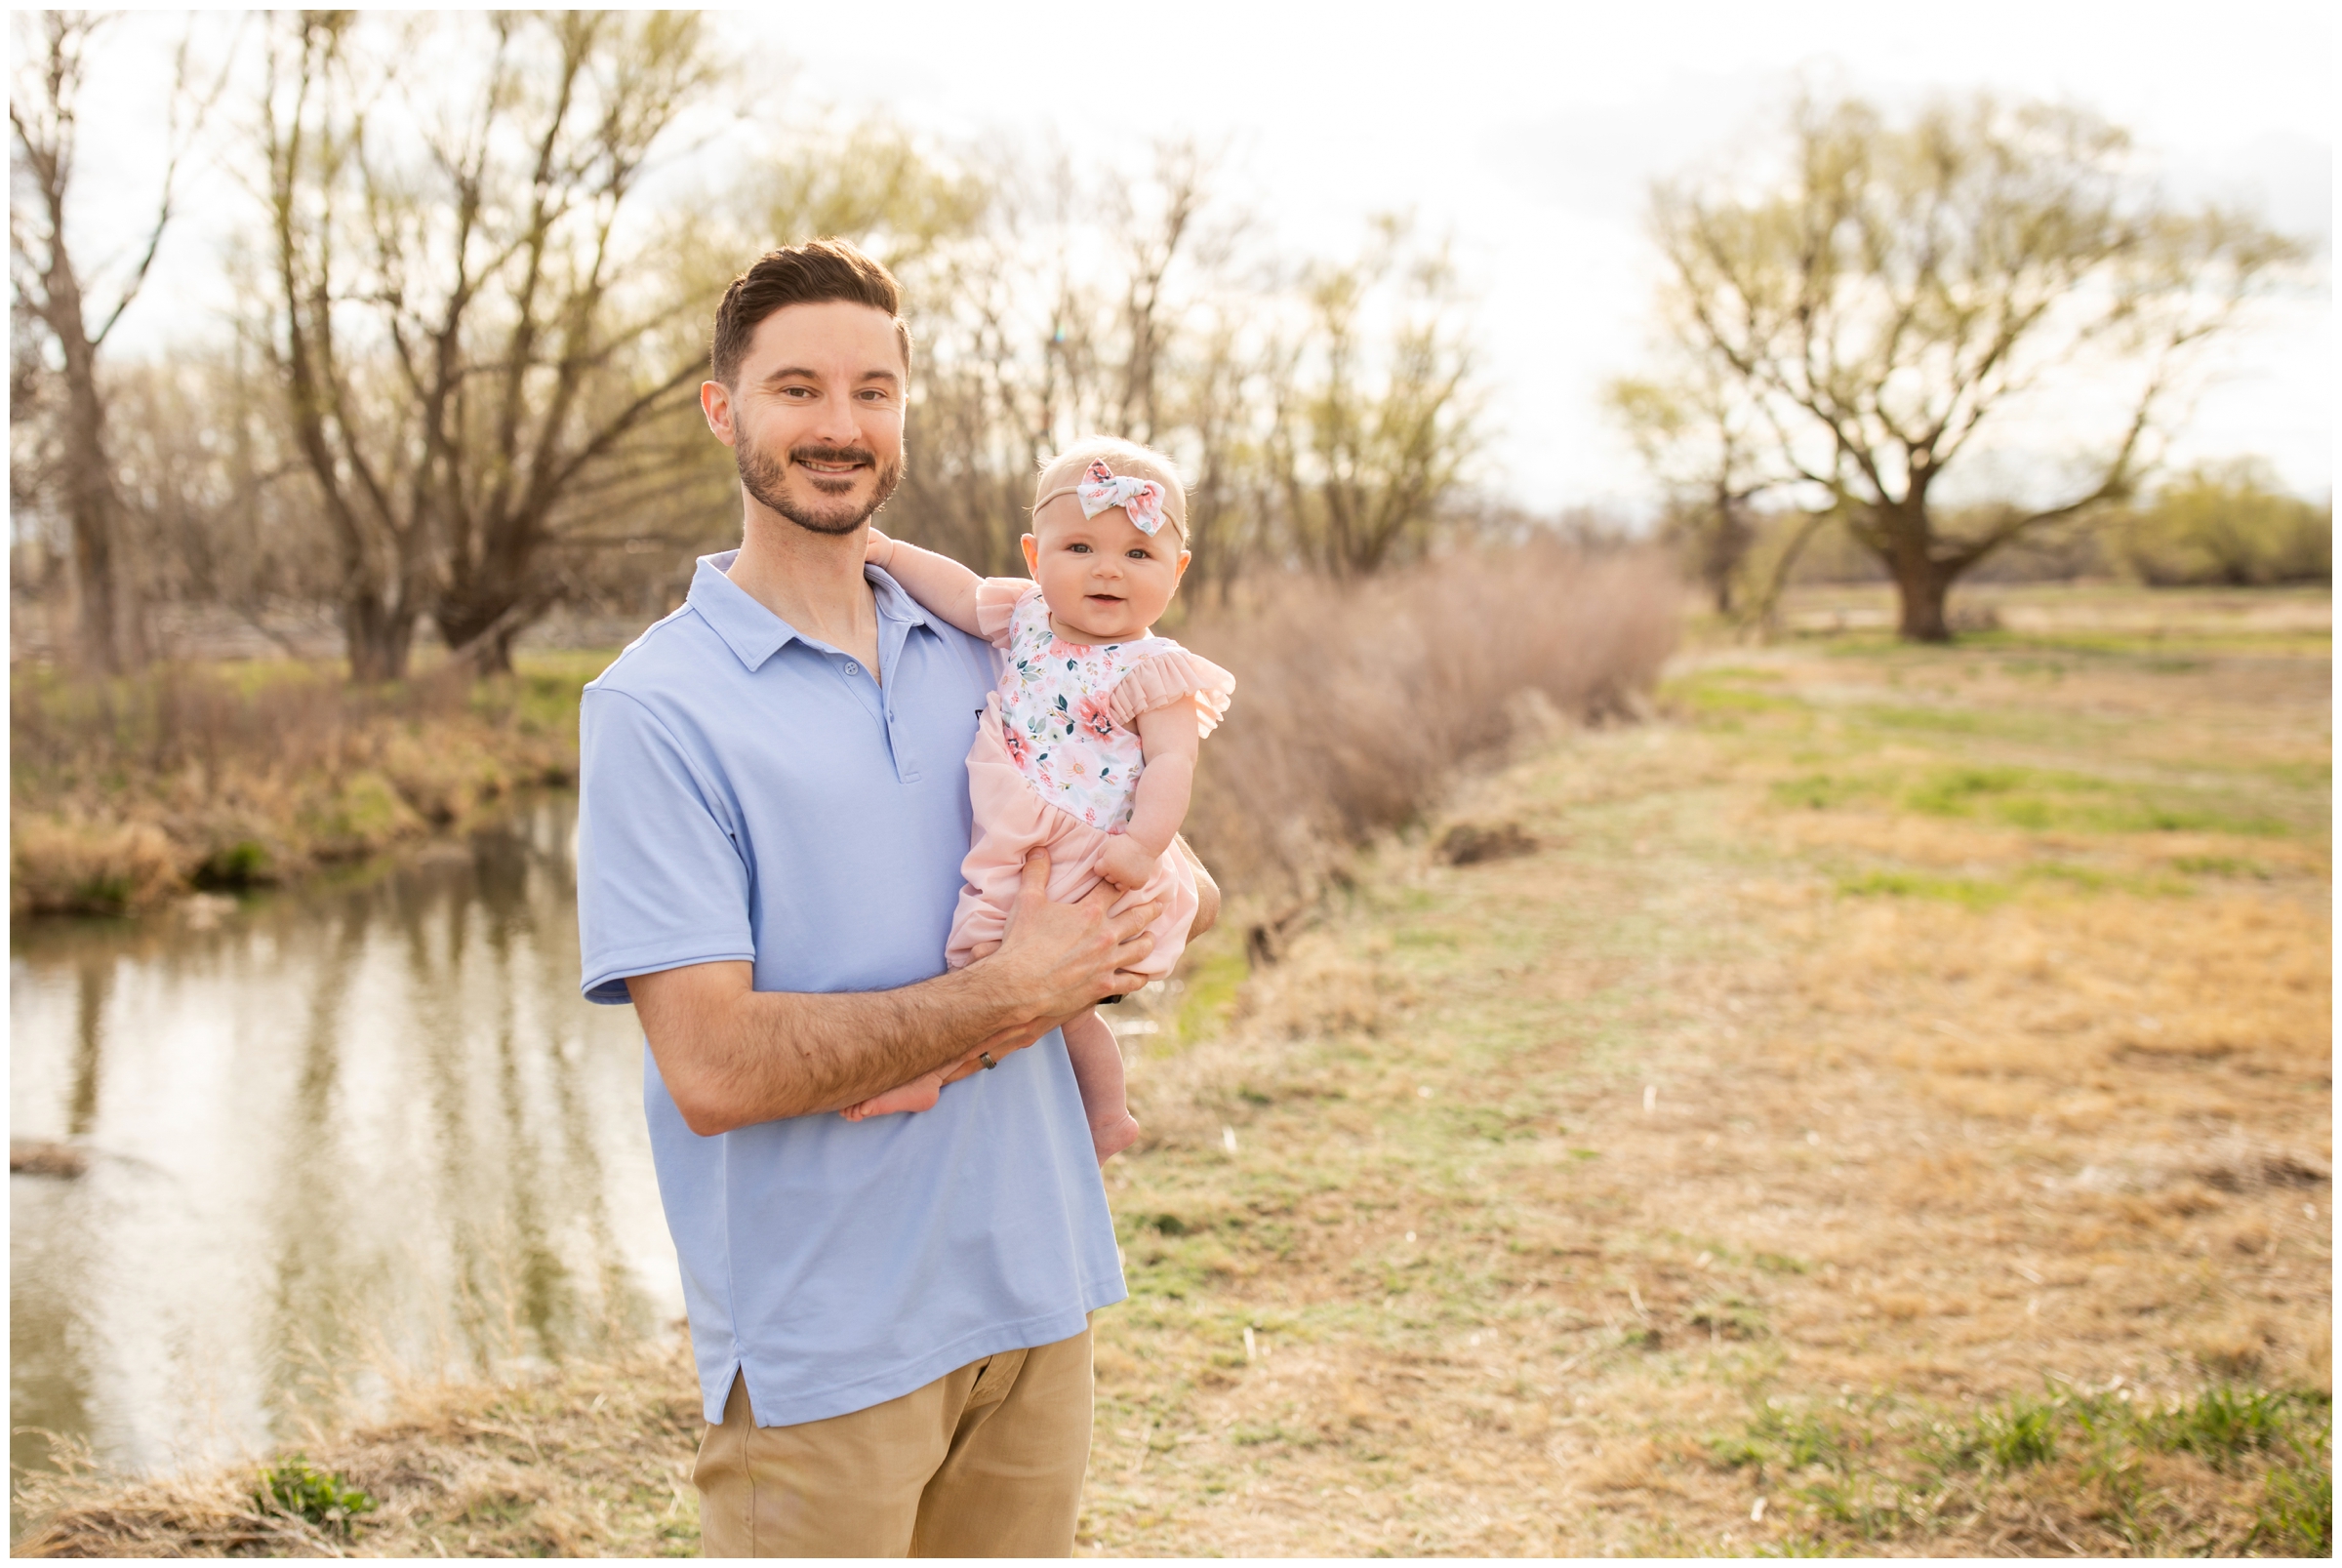 Longmont family portrait photography during spring at Sandstone Ranch by Colorado photographer Plum Pretty Photography